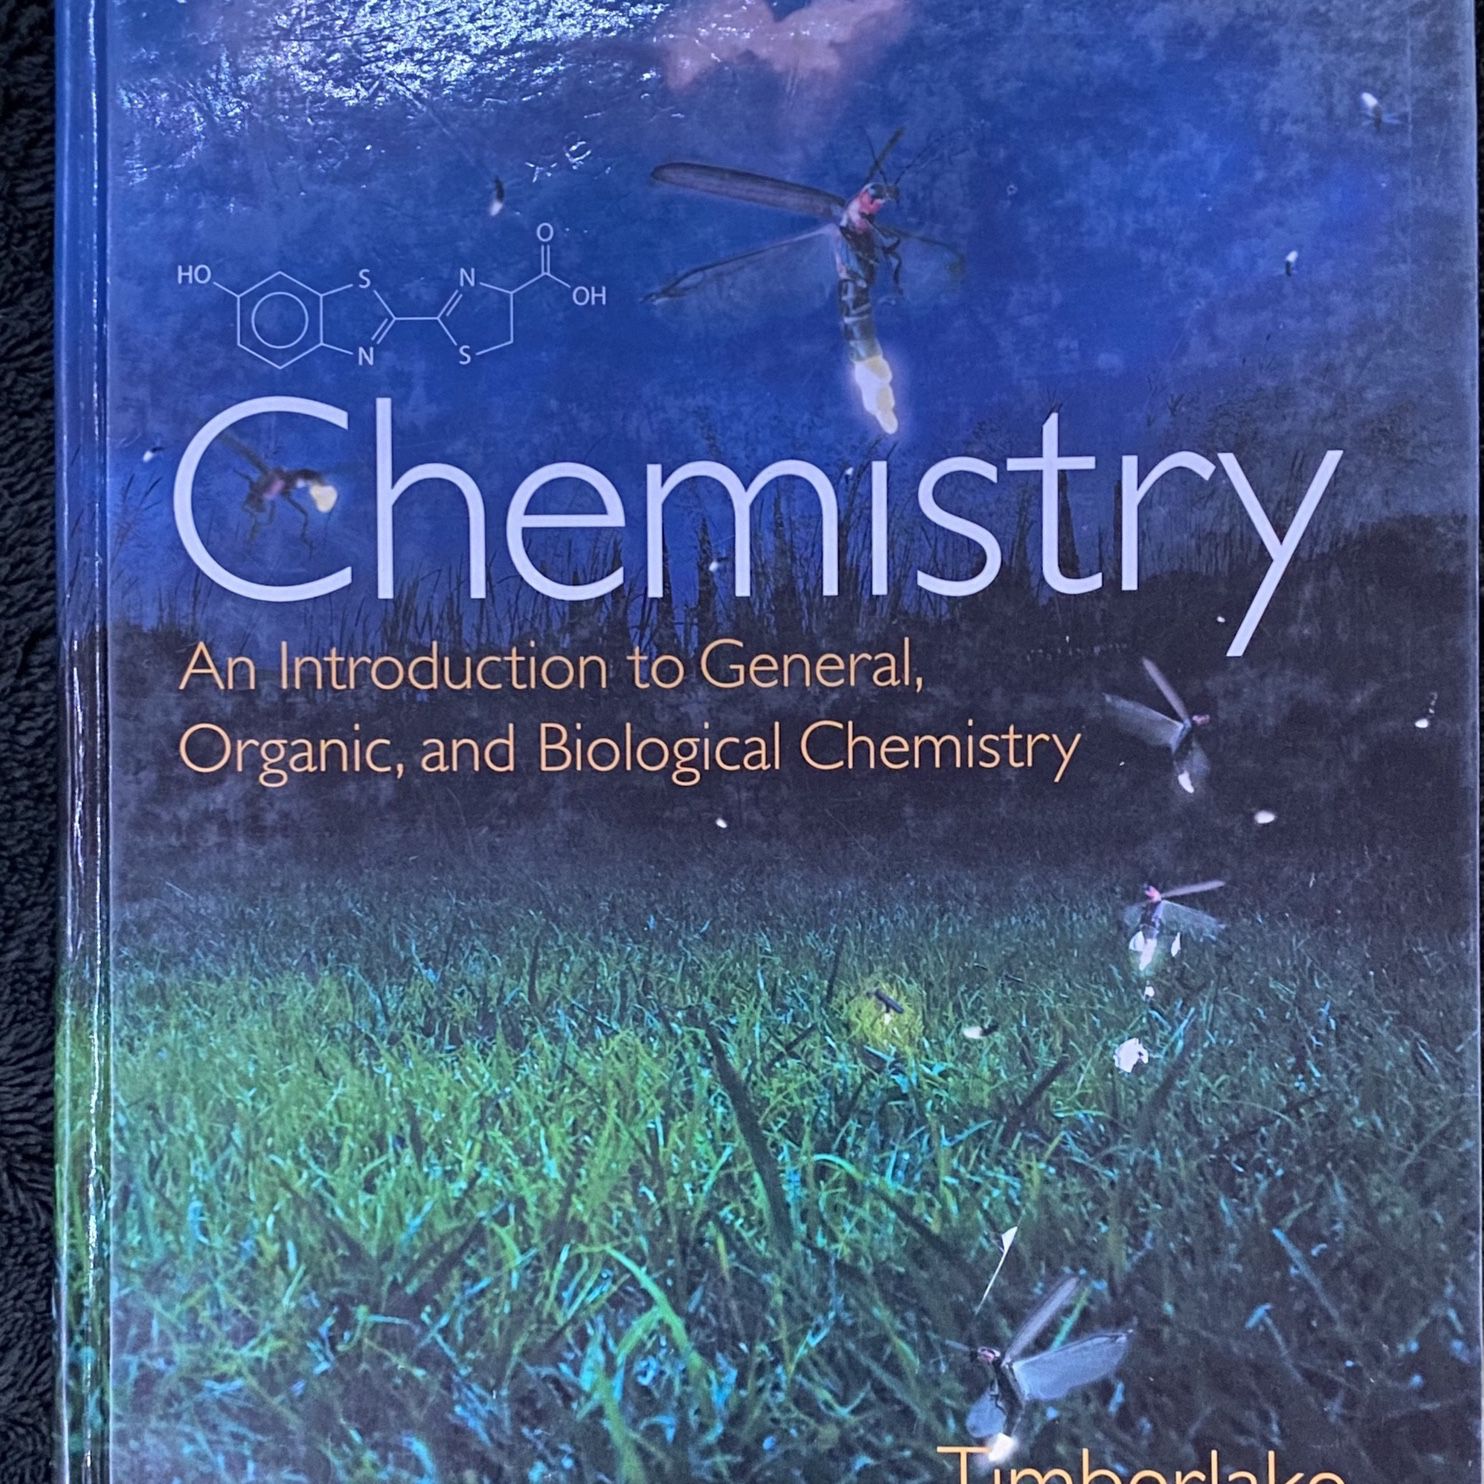 Mt SAC Chemistry: An Introduction to General, Organic, and Biological Chemistry (12th Edition) - Standalone book